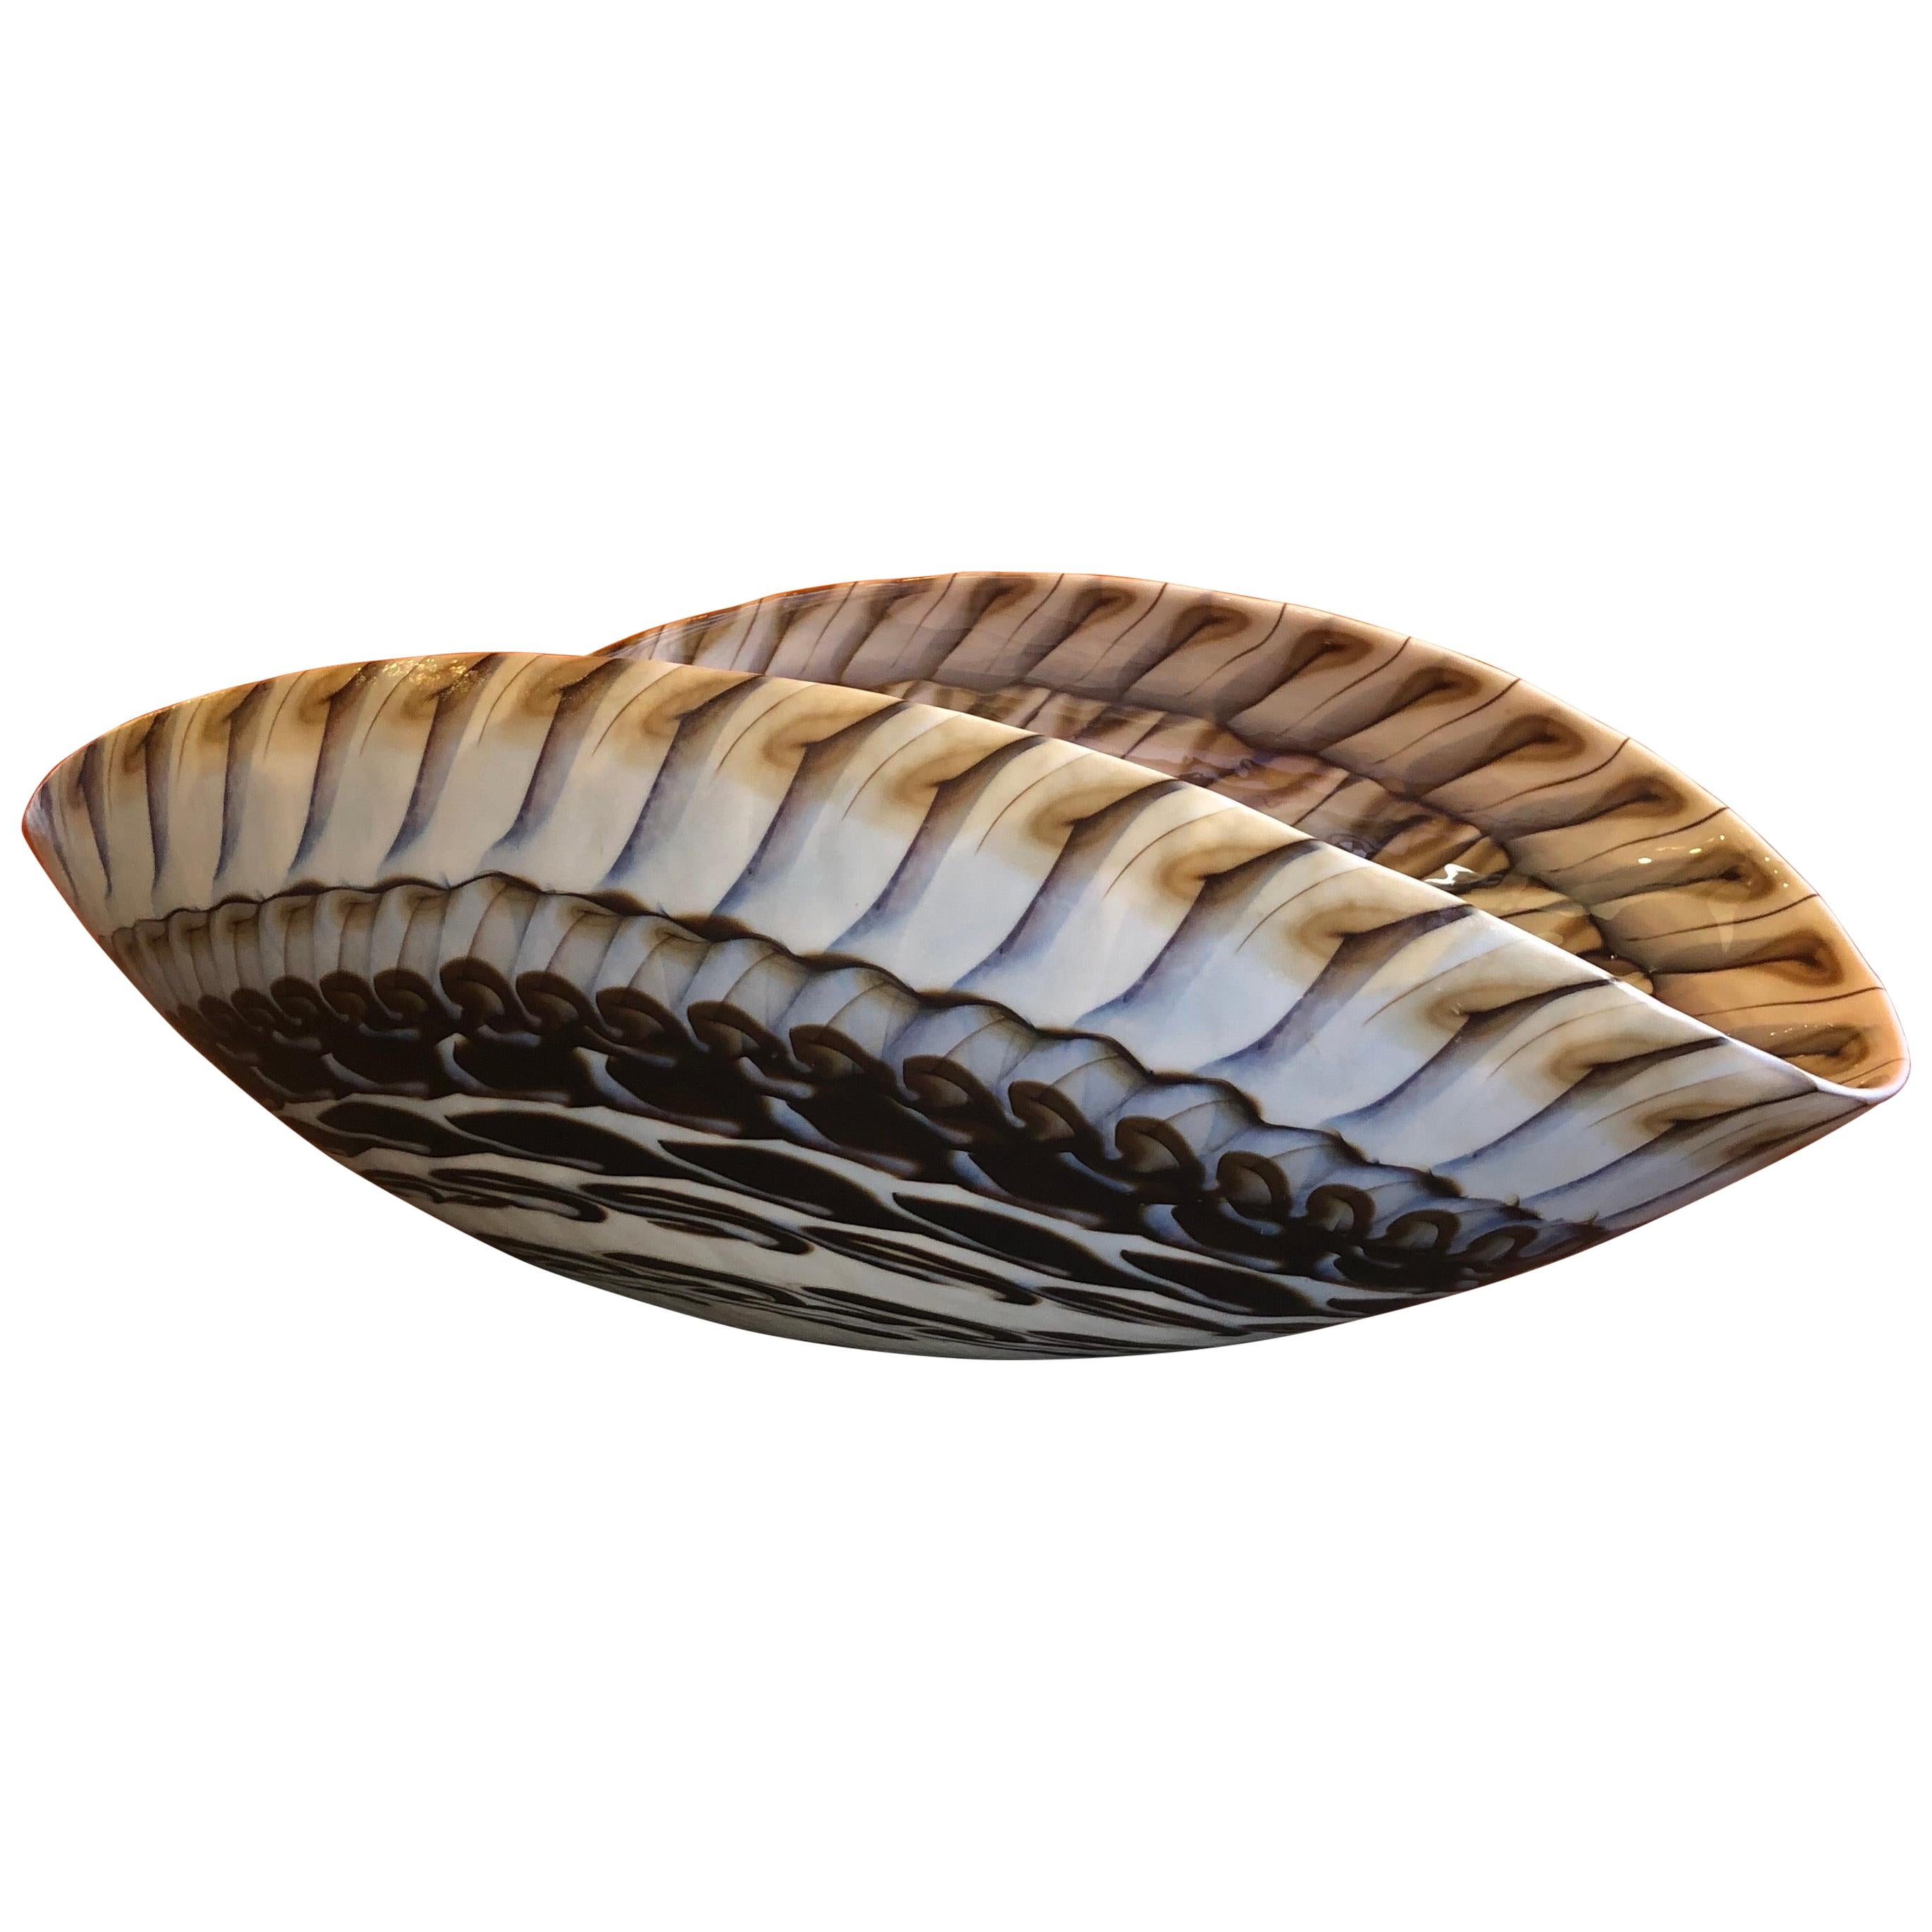 Extra Large "Seashell" Shaped Centerpiece Bowl by Yalos for Murano Glass